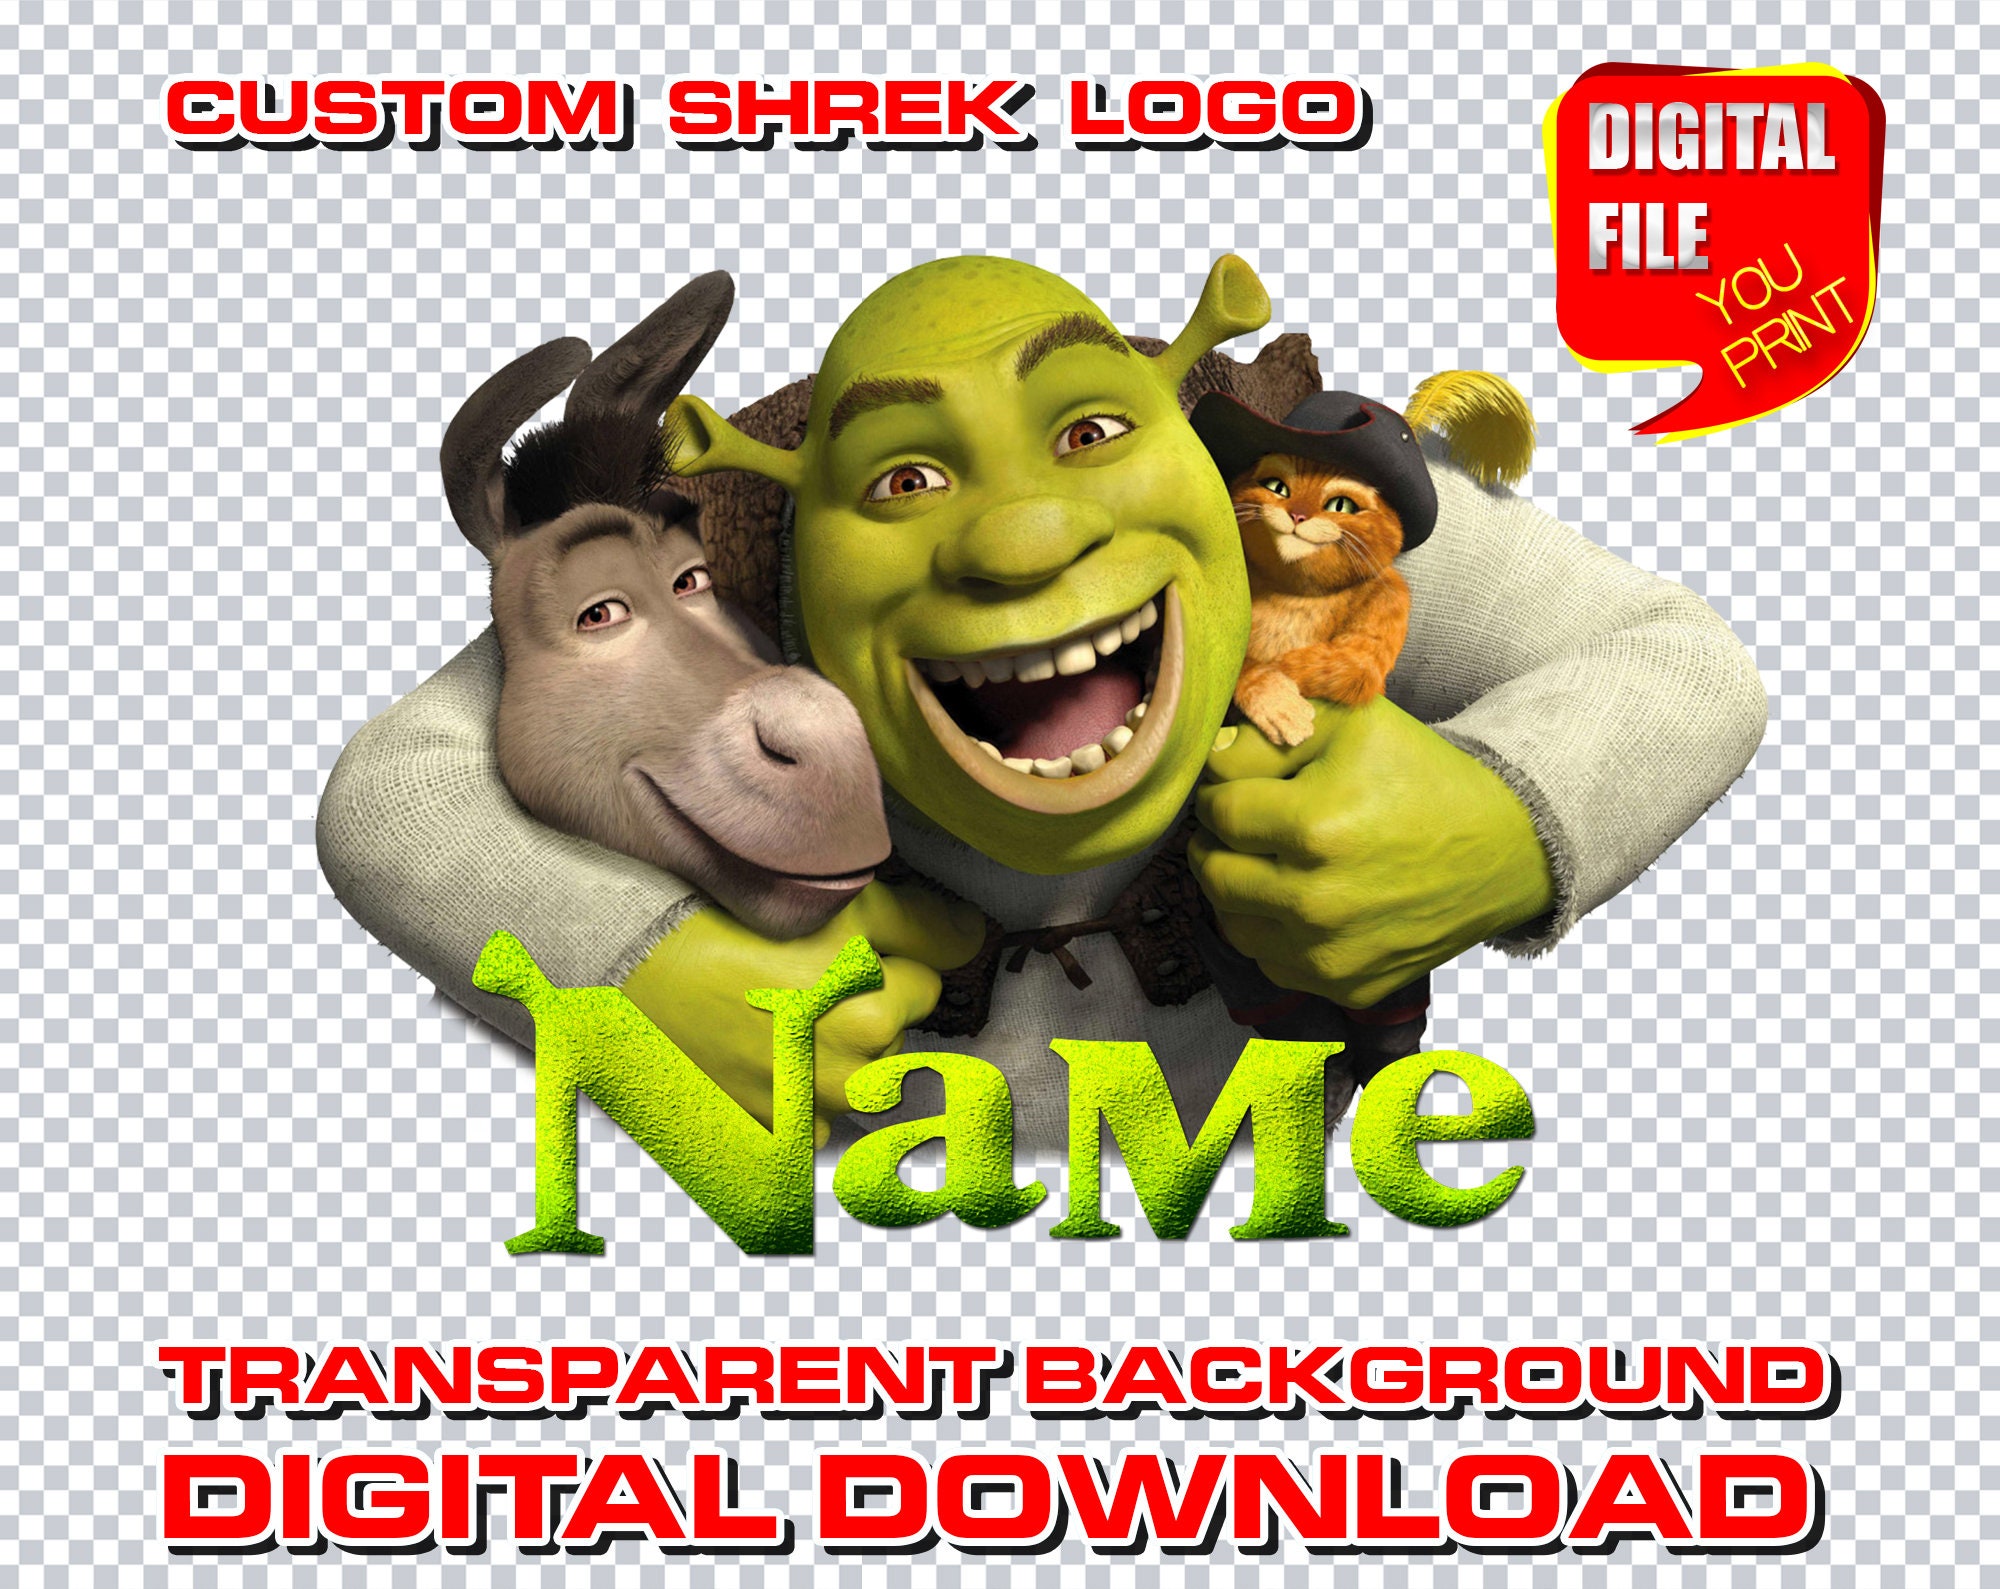 Puss in Boots Shrek Super Party Meme, puss in boots transparent background  PNG clipart